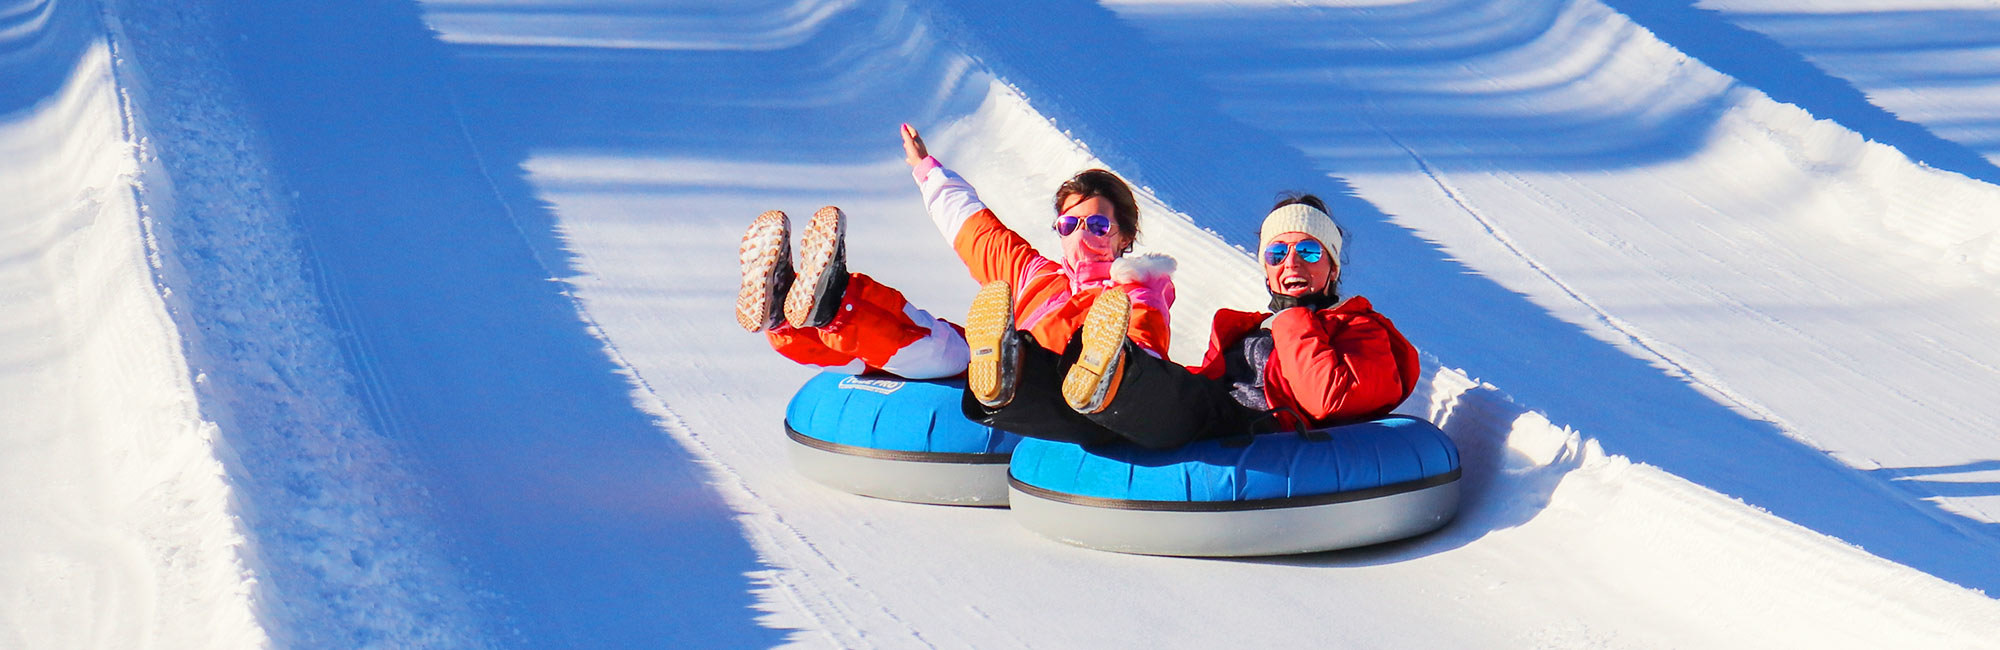 Two girls tubing down the hill.